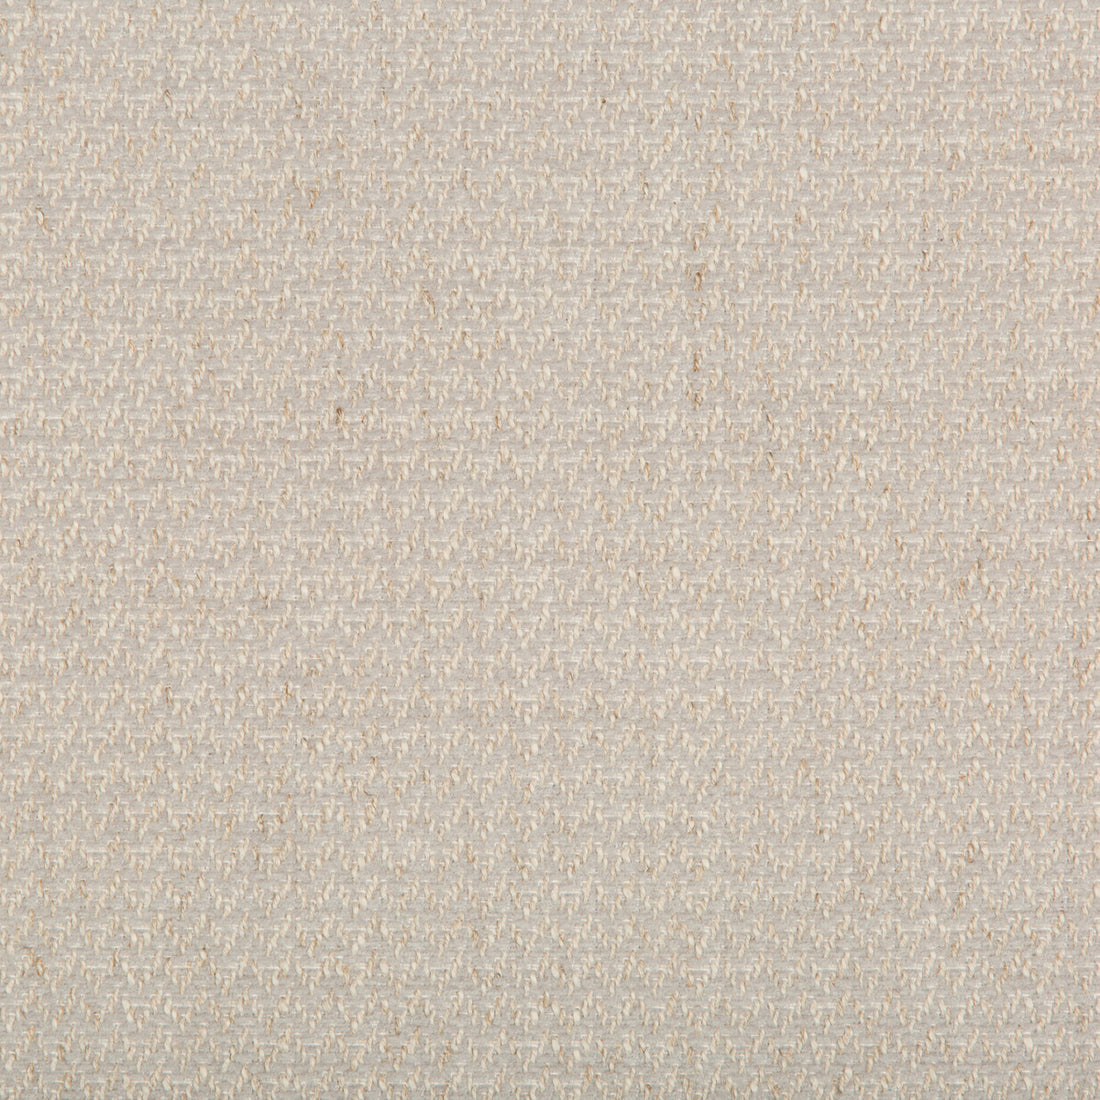 Kravet Smart fabric in 35394-11 color - pattern 35394.11.0 - by Kravet Smart in the Performance Crypton Home collection